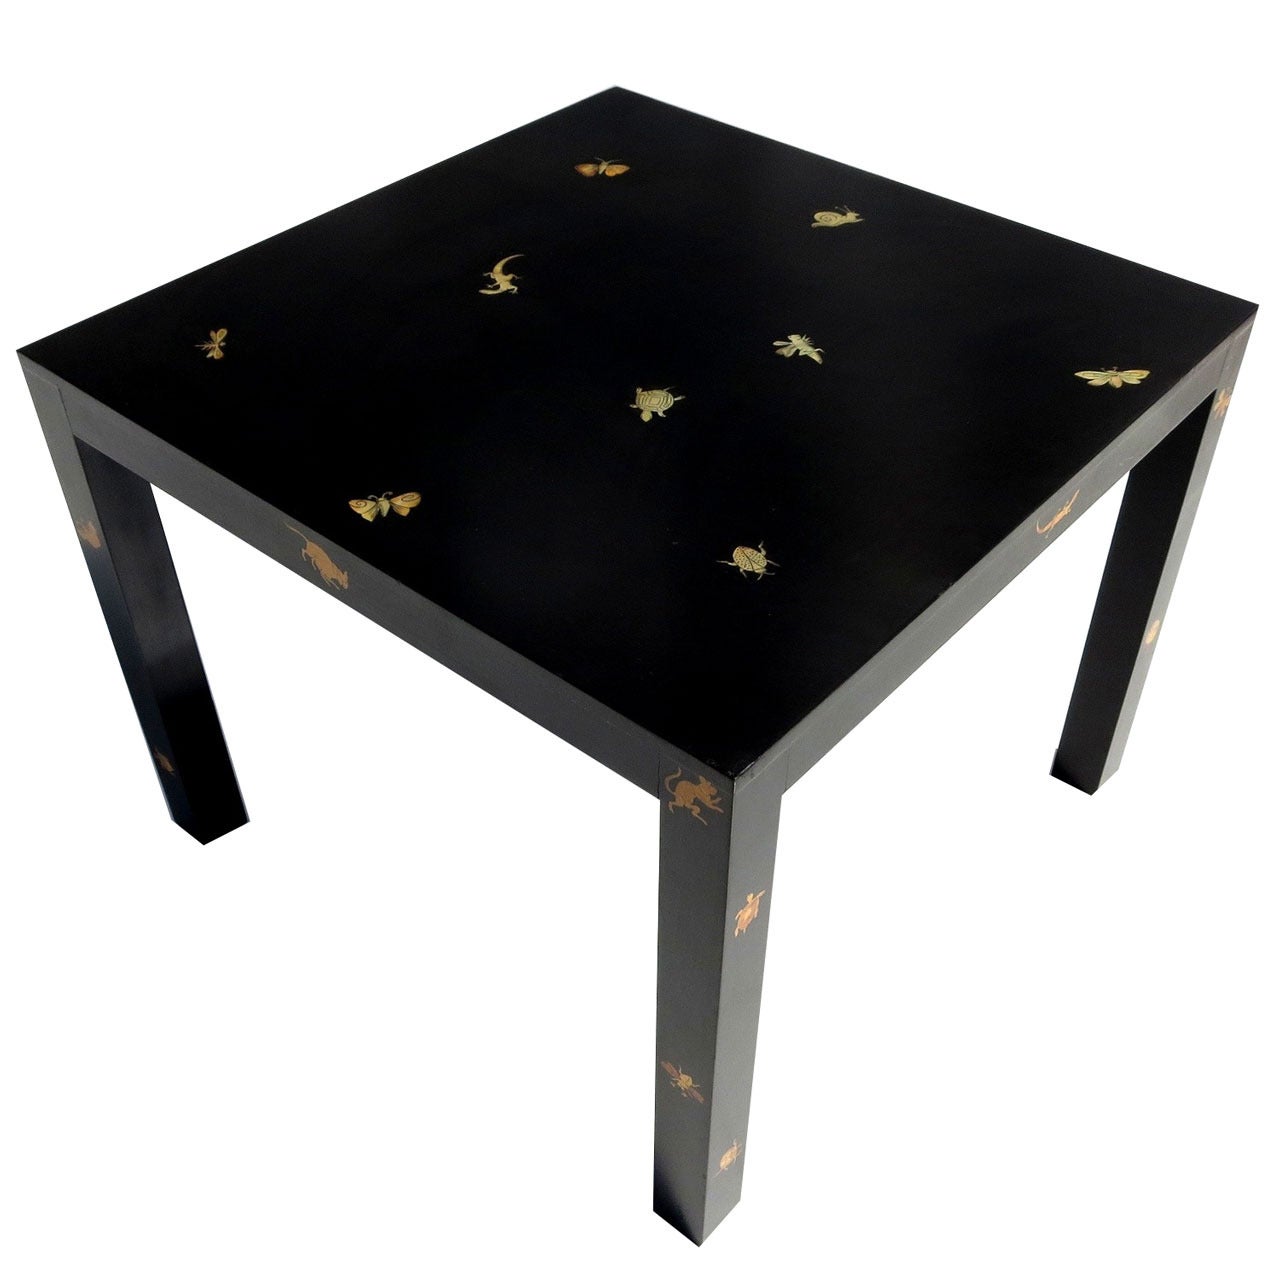 Inlaid "Insects and Creatures" Lacquered Table - Two Available